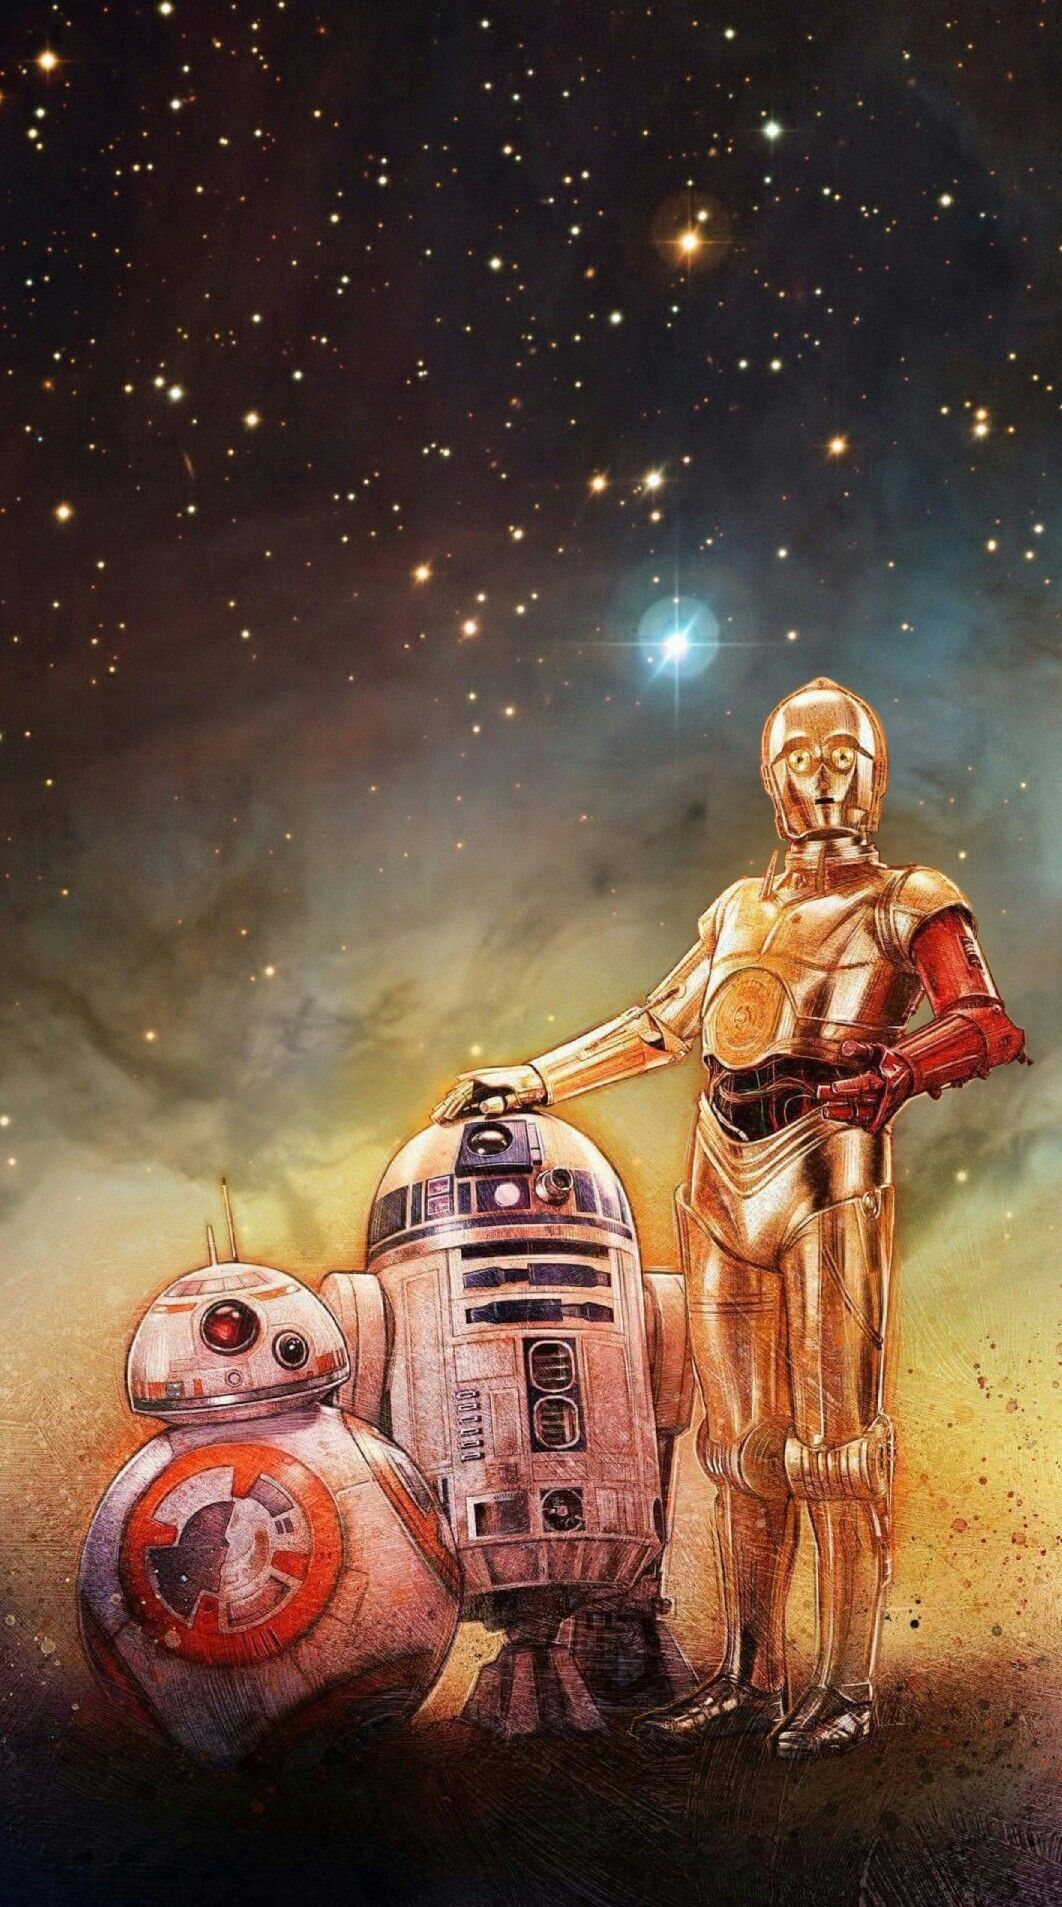 star wars animated wallpaper android